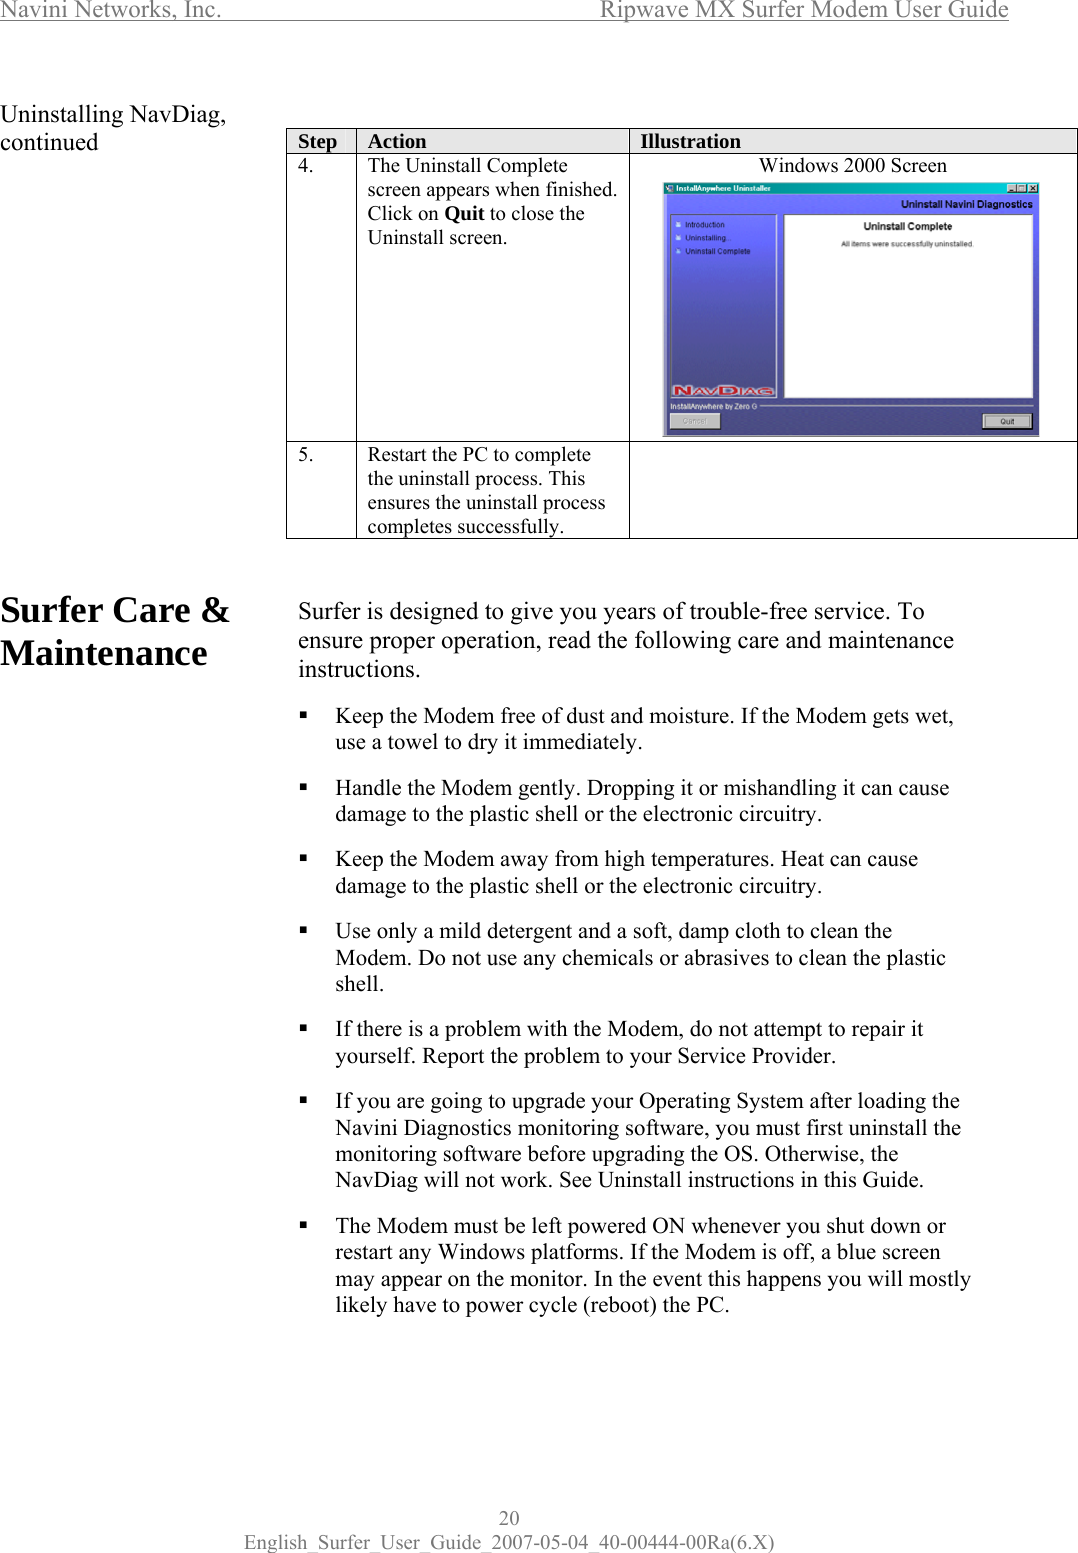 Navini Networks, Inc.      Ripwave MX Surfer Modem User Guide 20 English_Surfer_User_Guide_2007-05-04_40-00444-00Ra(6.X) Uninstalling NavDiag, continued                Surfer Care &amp; Maintenance                      Step  Action  Illustration 4.  The Uninstall Complete screen appears when finished. Click on Quit to close the Uninstall screen. Windows 2000 Screen            5.  Restart the PC to complete the uninstall process. This ensures the uninstall process completes successfully.    Surfer is designed to give you years of trouble-free service. To ensure proper operation, read the following care and maintenance instructions.   Keep the Modem free of dust and moisture. If the Modem gets wet, use a towel to dry it immediately.   Handle the Modem gently. Dropping it or mishandling it can cause damage to the plastic shell or the electronic circuitry.   Keep the Modem away from high temperatures. Heat can cause damage to the plastic shell or the electronic circuitry.   Use only a mild detergent and a soft, damp cloth to clean the Modem. Do not use any chemicals or abrasives to clean the plastic shell.   If there is a problem with the Modem, do not attempt to repair it yourself. Report the problem to your Service Provider.   If you are going to upgrade your Operating System after loading the Navini Diagnostics monitoring software, you must first uninstall the monitoring software before upgrading the OS. Otherwise, the NavDiag will not work. See Uninstall instructions in this Guide.   The Modem must be left powered ON whenever you shut down or restart any Windows platforms. If the Modem is off, a blue screen may appear on the monitor. In the event this happens you will mostly likely have to power cycle (reboot) the PC.   